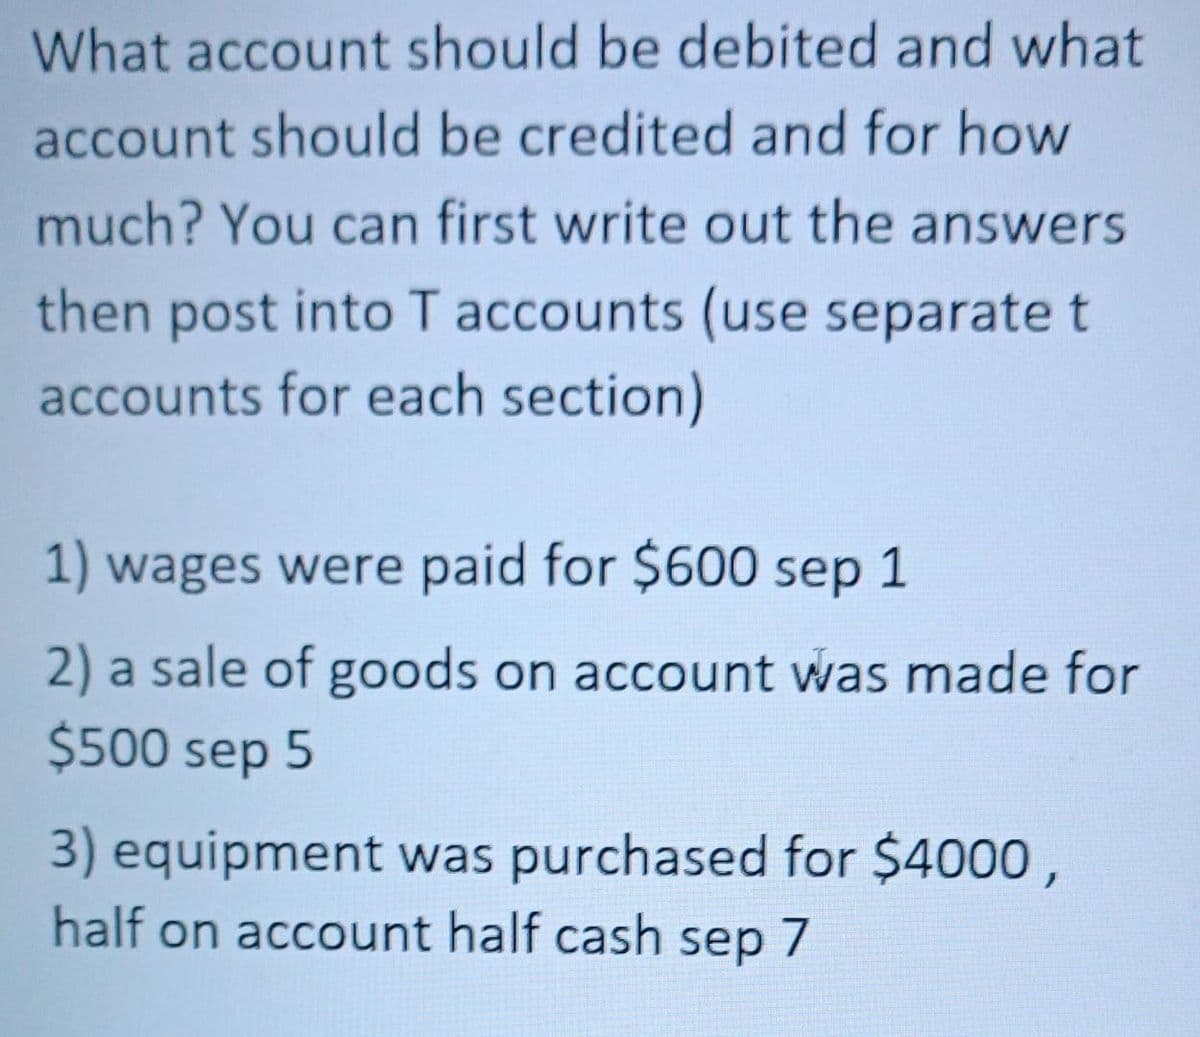 What account should be debited and what
account should be credited and for how
much? You can first write out the answers
then post into T accounts (use separate t
accounts for each section)
1) wages were paid for $600 sep 1
2) a sale of goods on account was made for
$500 sep 5
3) equipment was purchased for $4000,
half on account half cash sep 7